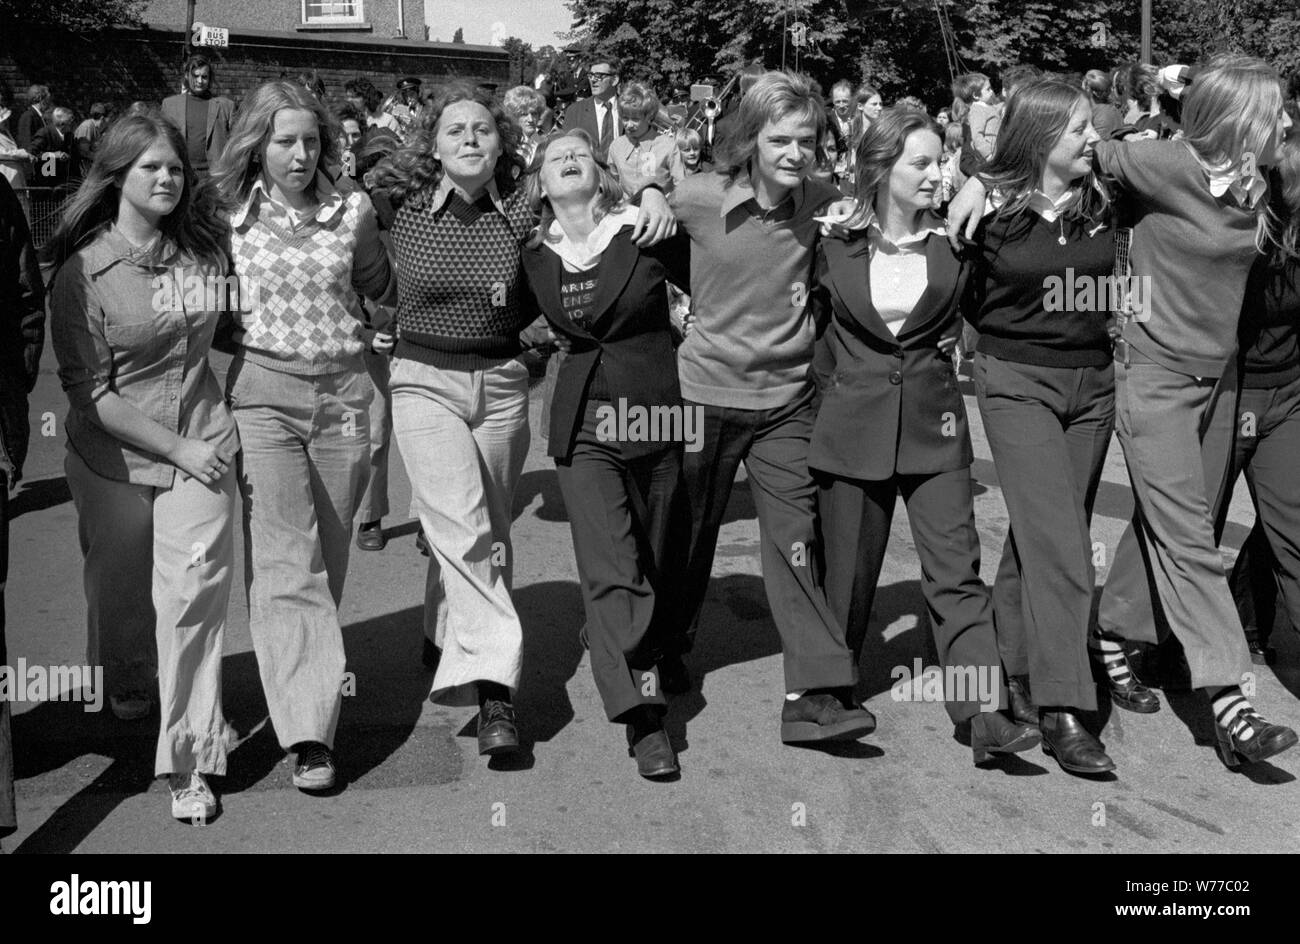 Teenage girls arms linked together having fun, looking stylish 1970s at the Durham Coal Miners annual gala  County Durham UK 70s.  One boy in the middle. All the girls are wearing trousers.1974 England HOMER SYKES Stock Photo